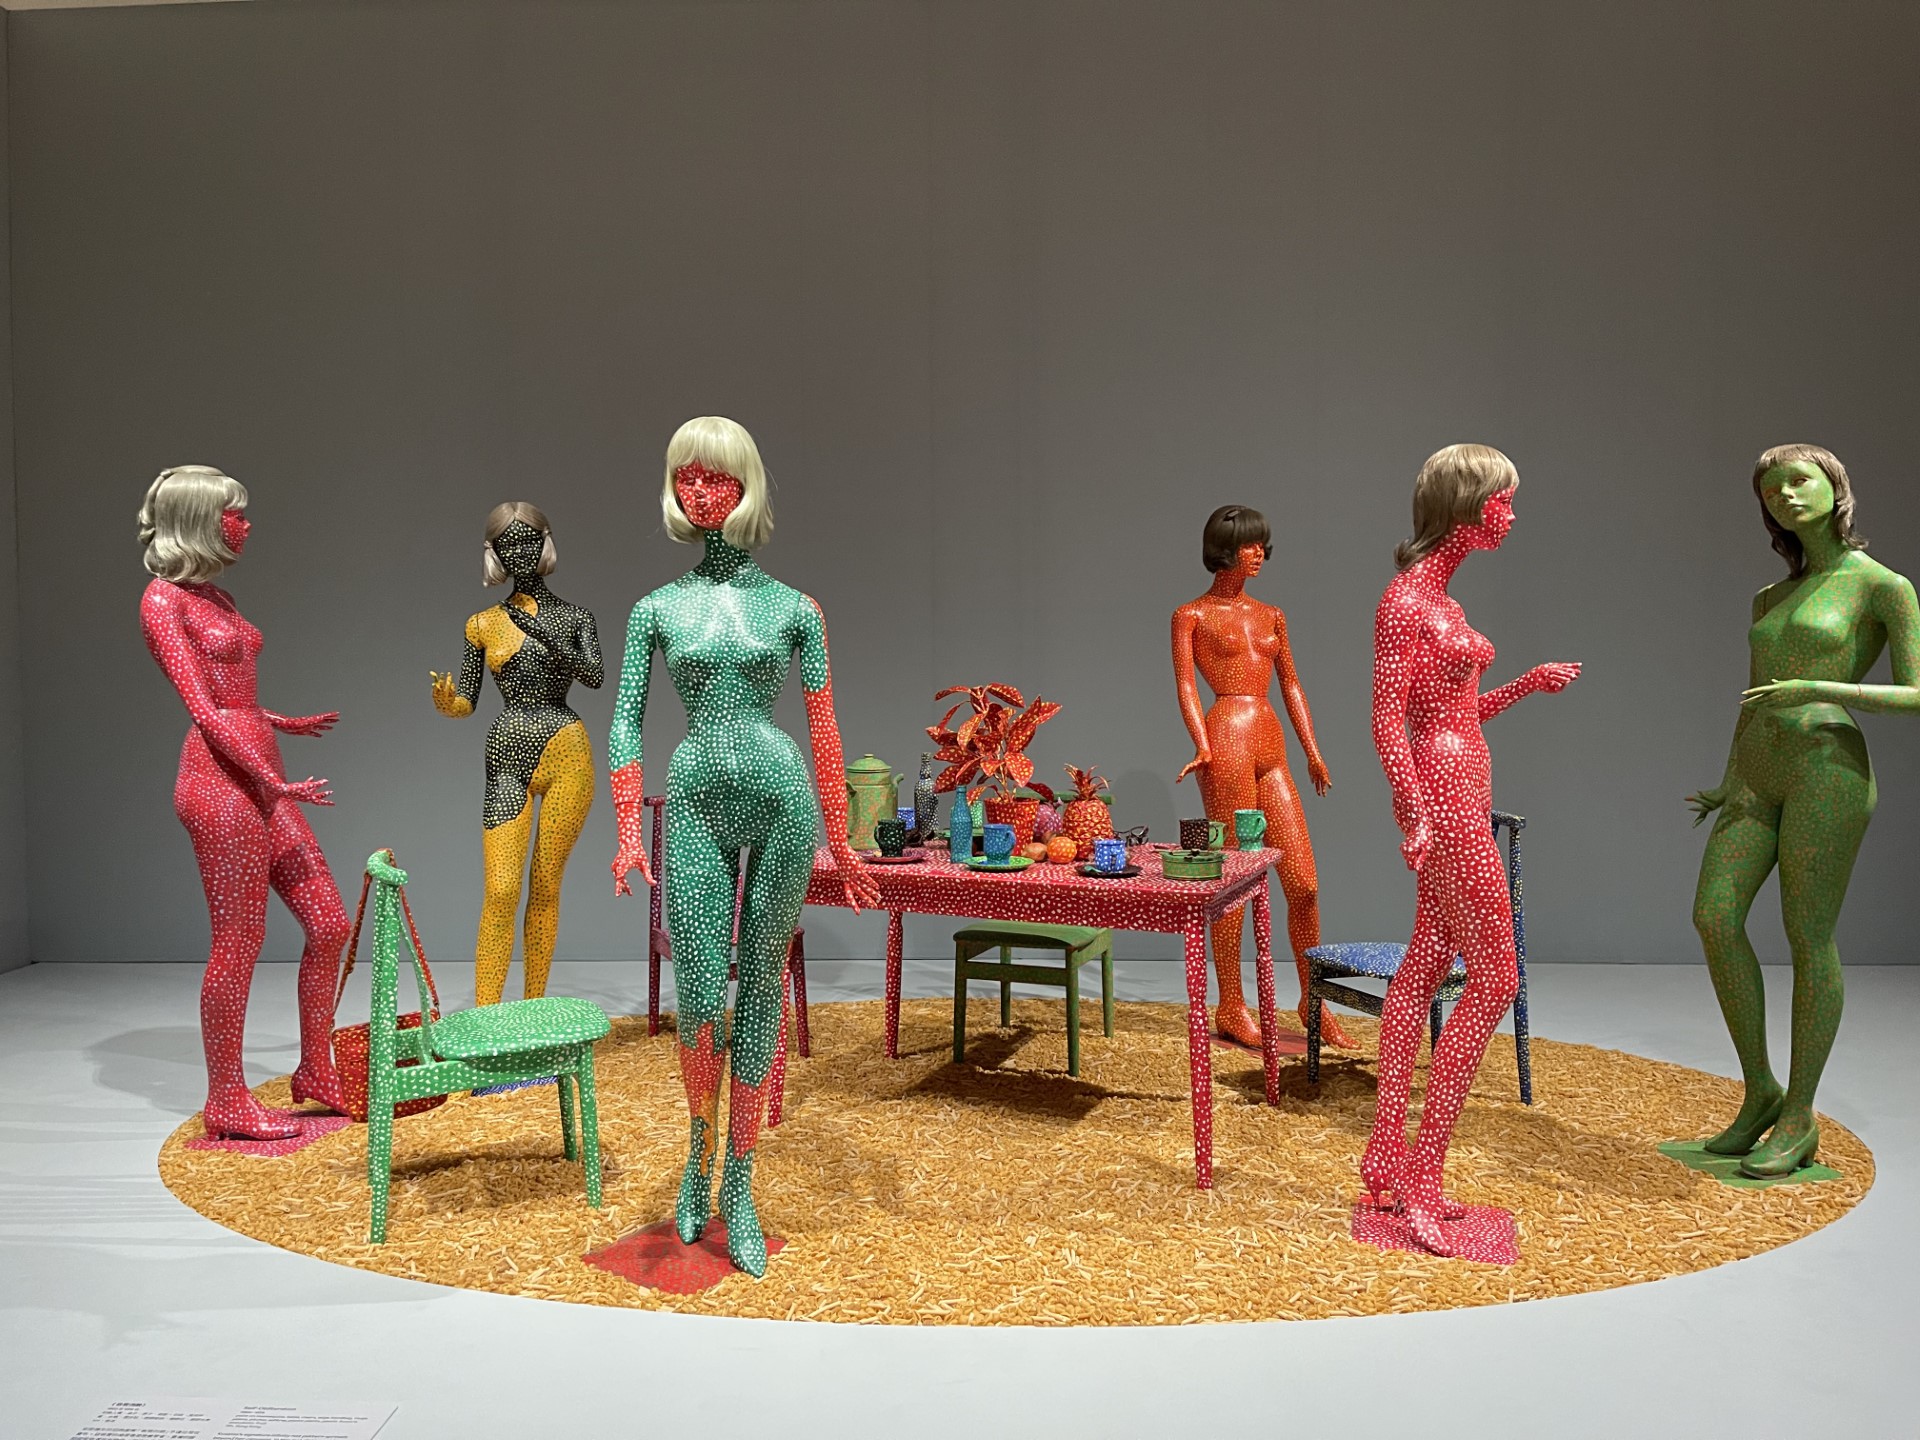 Colourful figures standing around a table